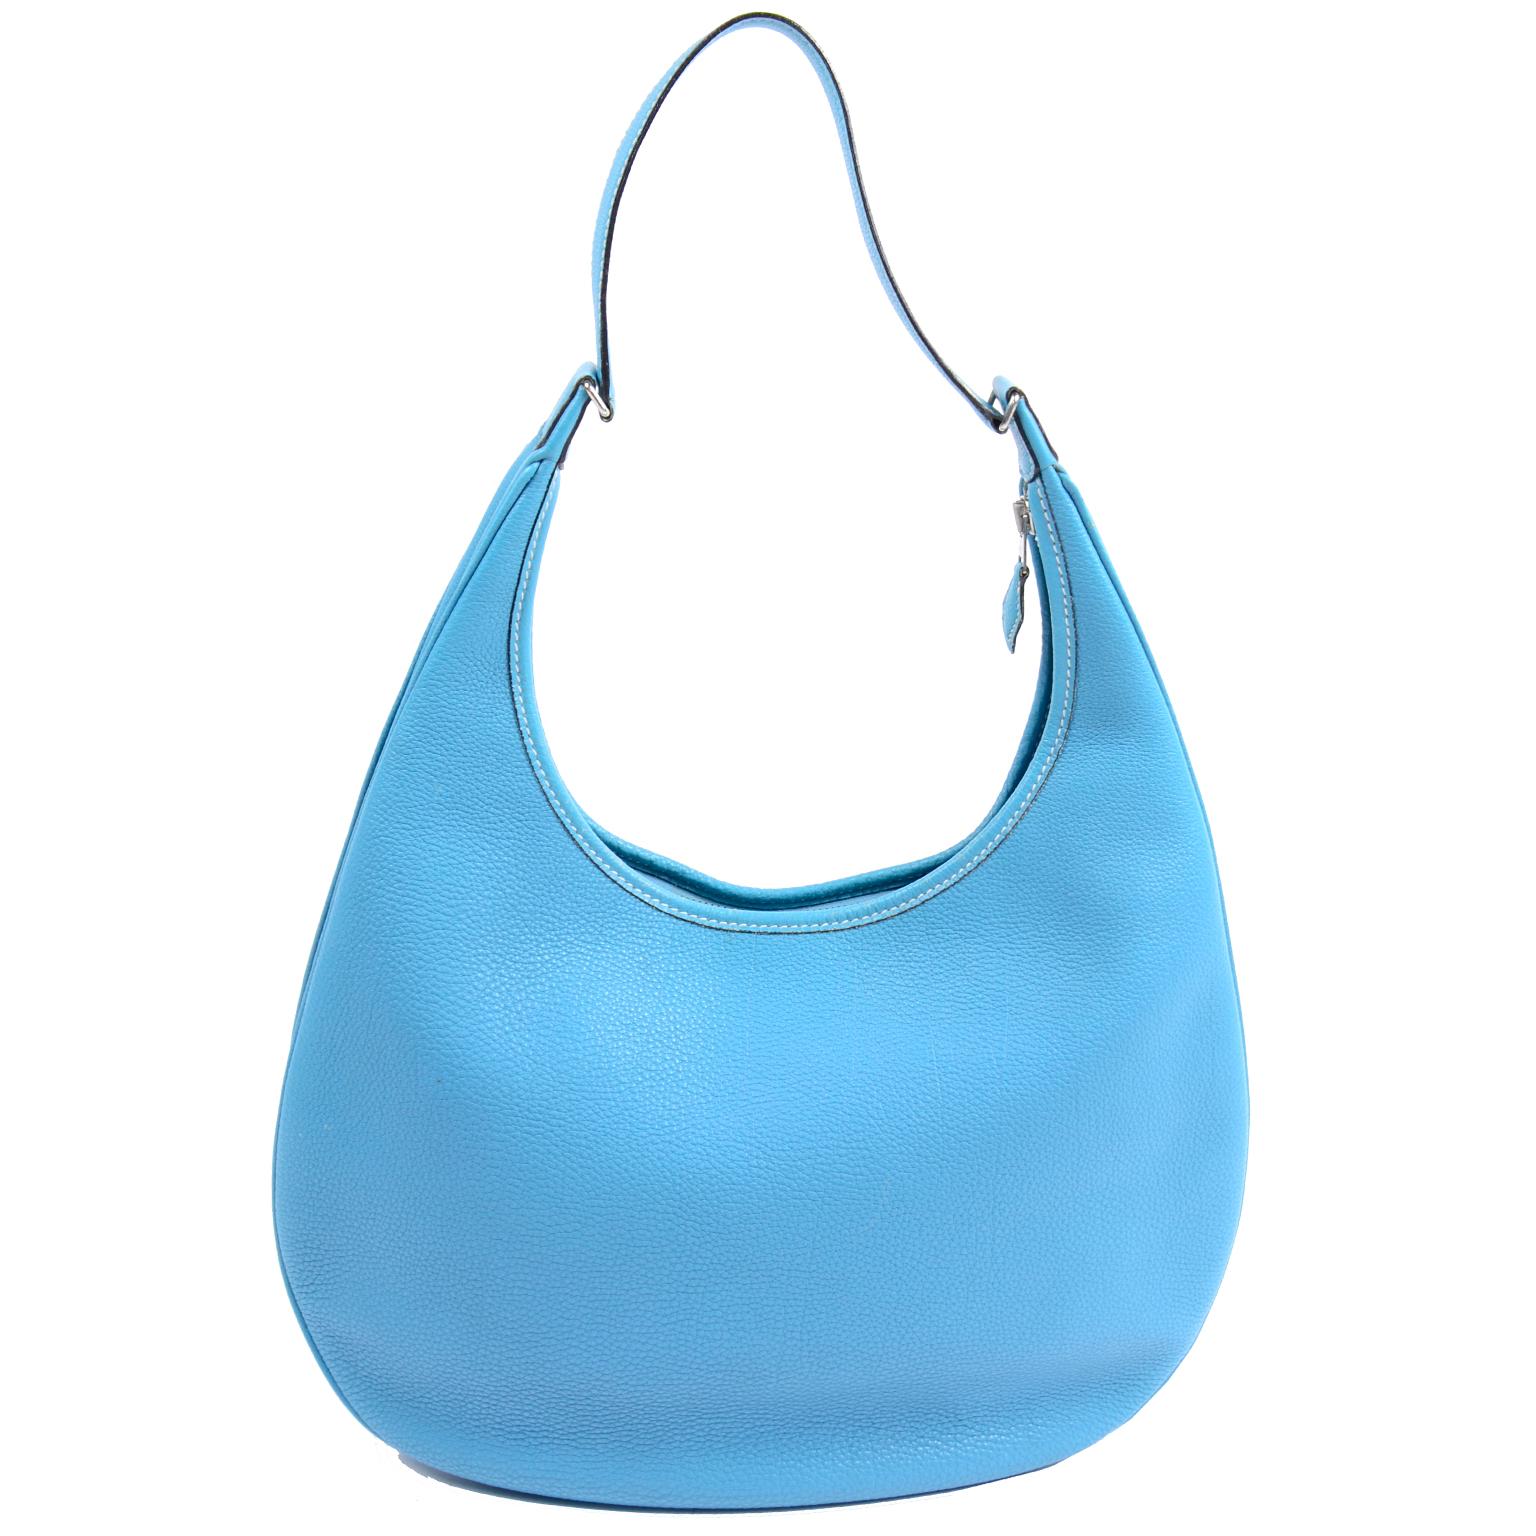 Hermes 2002 Gao Bag Blue Togo Leather Hobo Style Handbag In Excellent Condition In Portland, OR